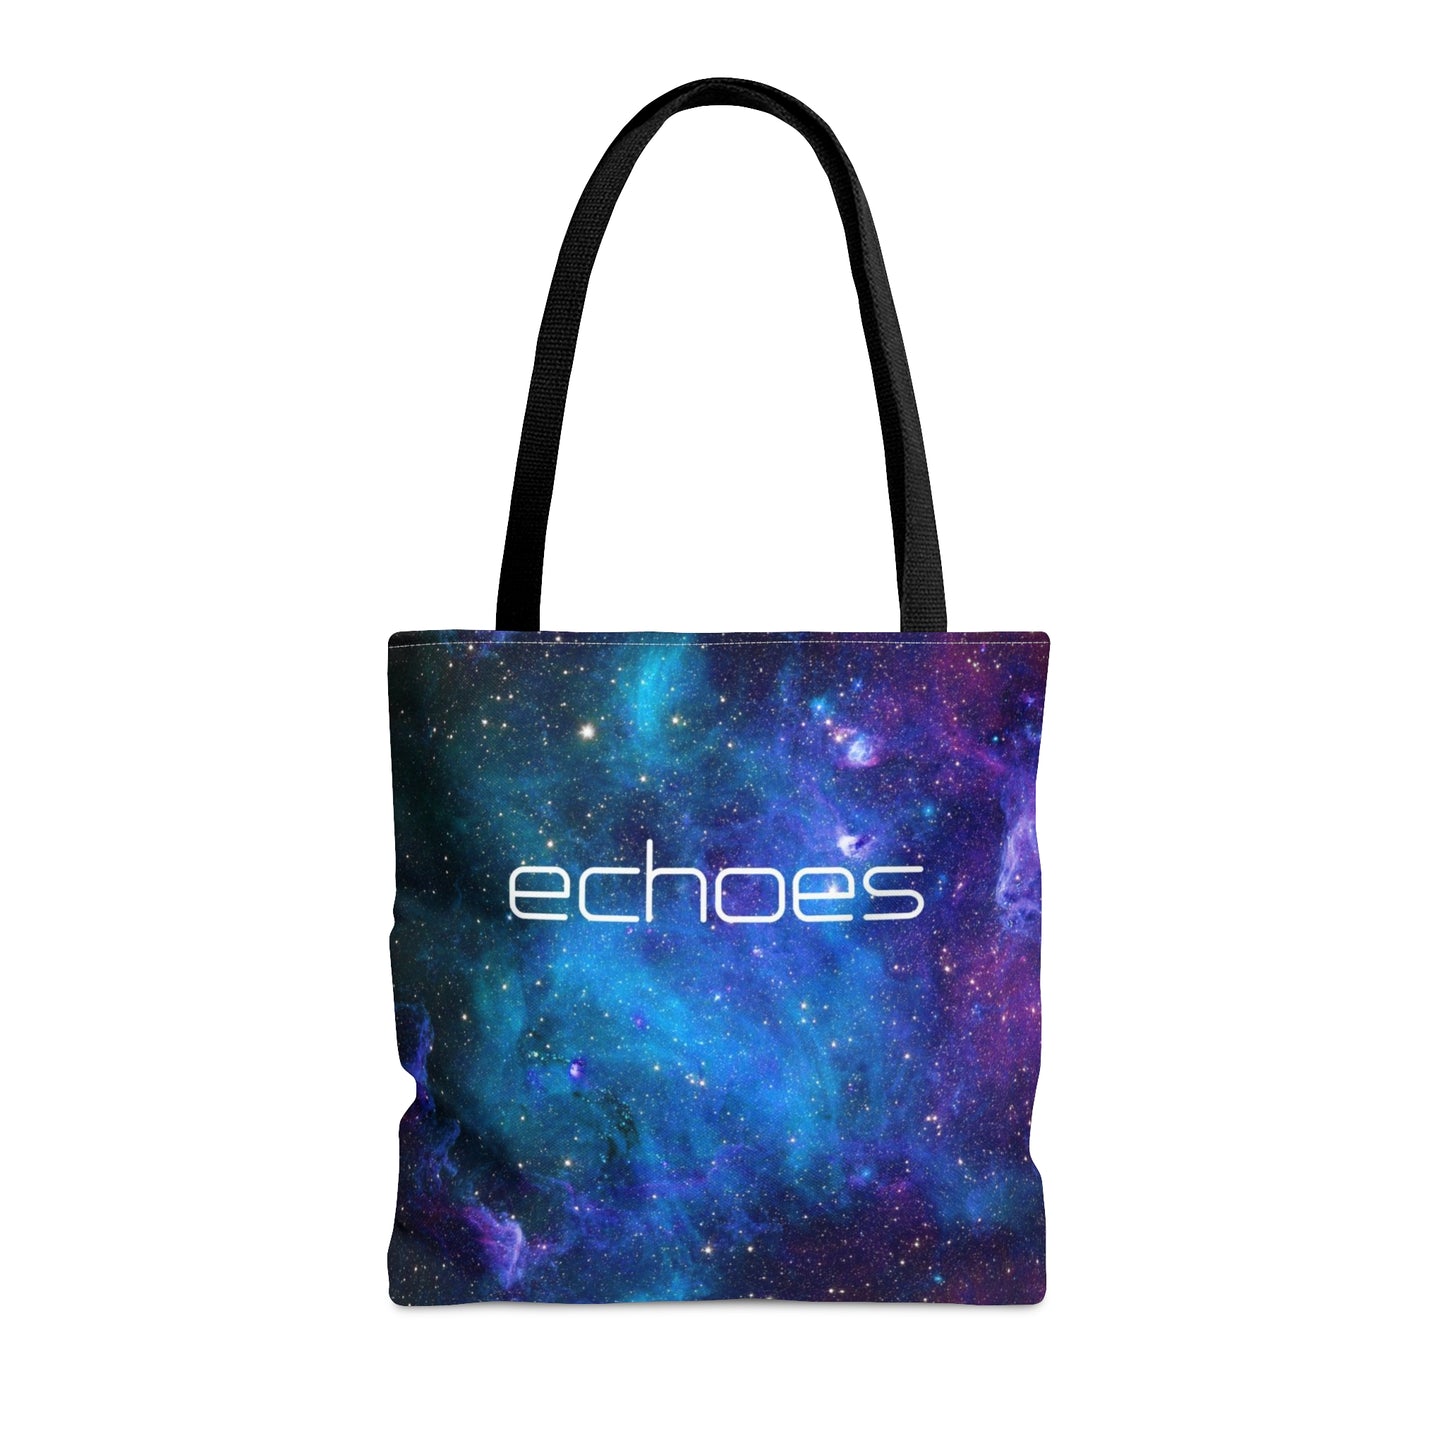 Echoes Starry Tote Bag